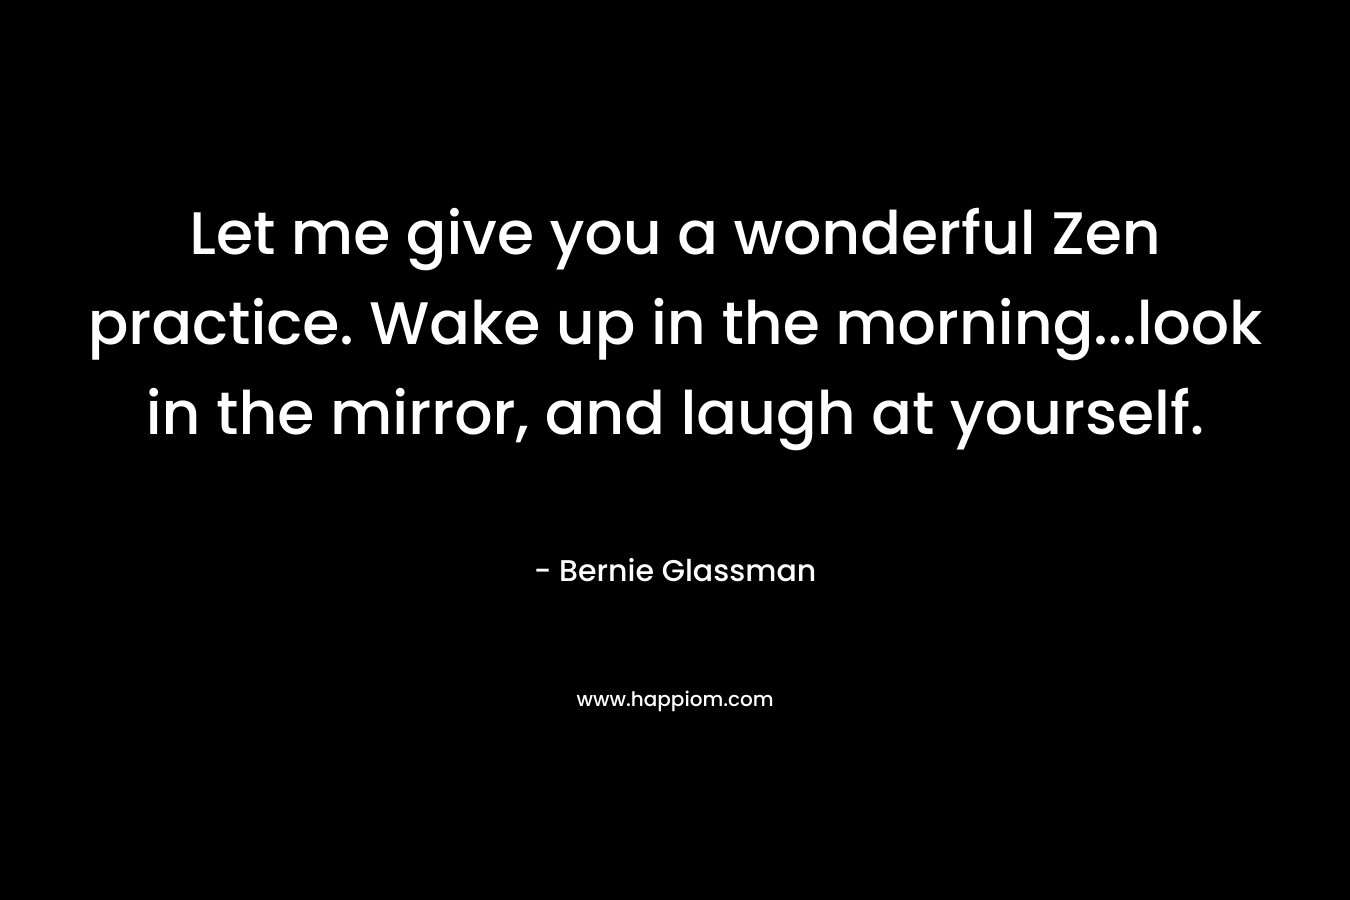 Let me give you a wonderful Zen practice. Wake up in the morning...look in the mirror, and laugh at yourself.